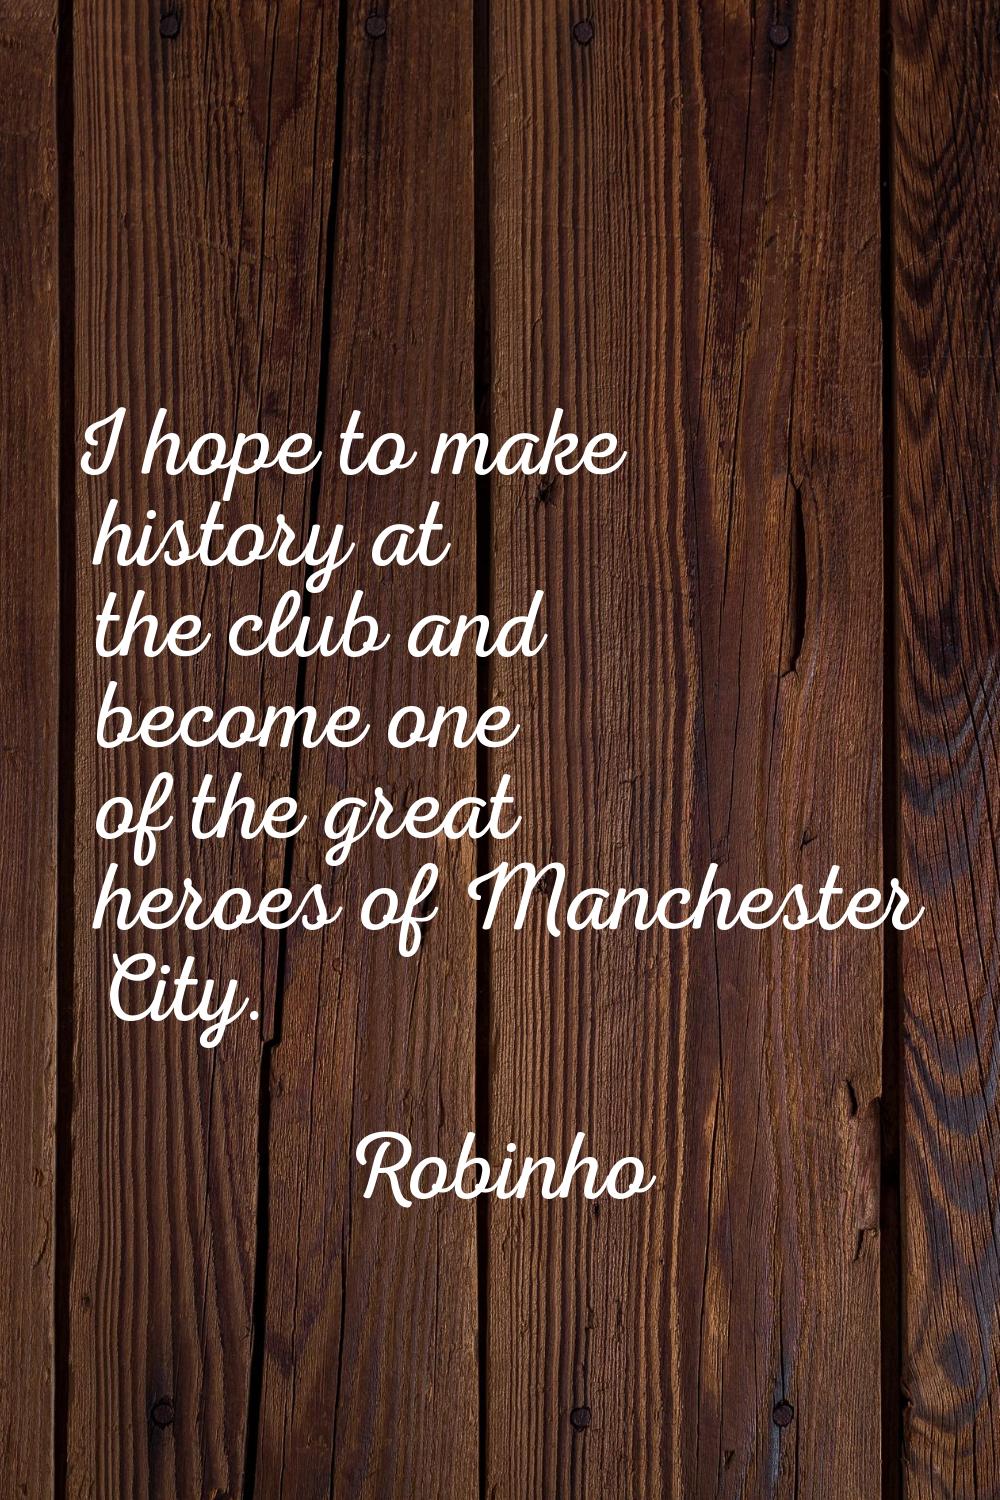 I hope to make history at the club and become one of the great heroes of Manchester City.